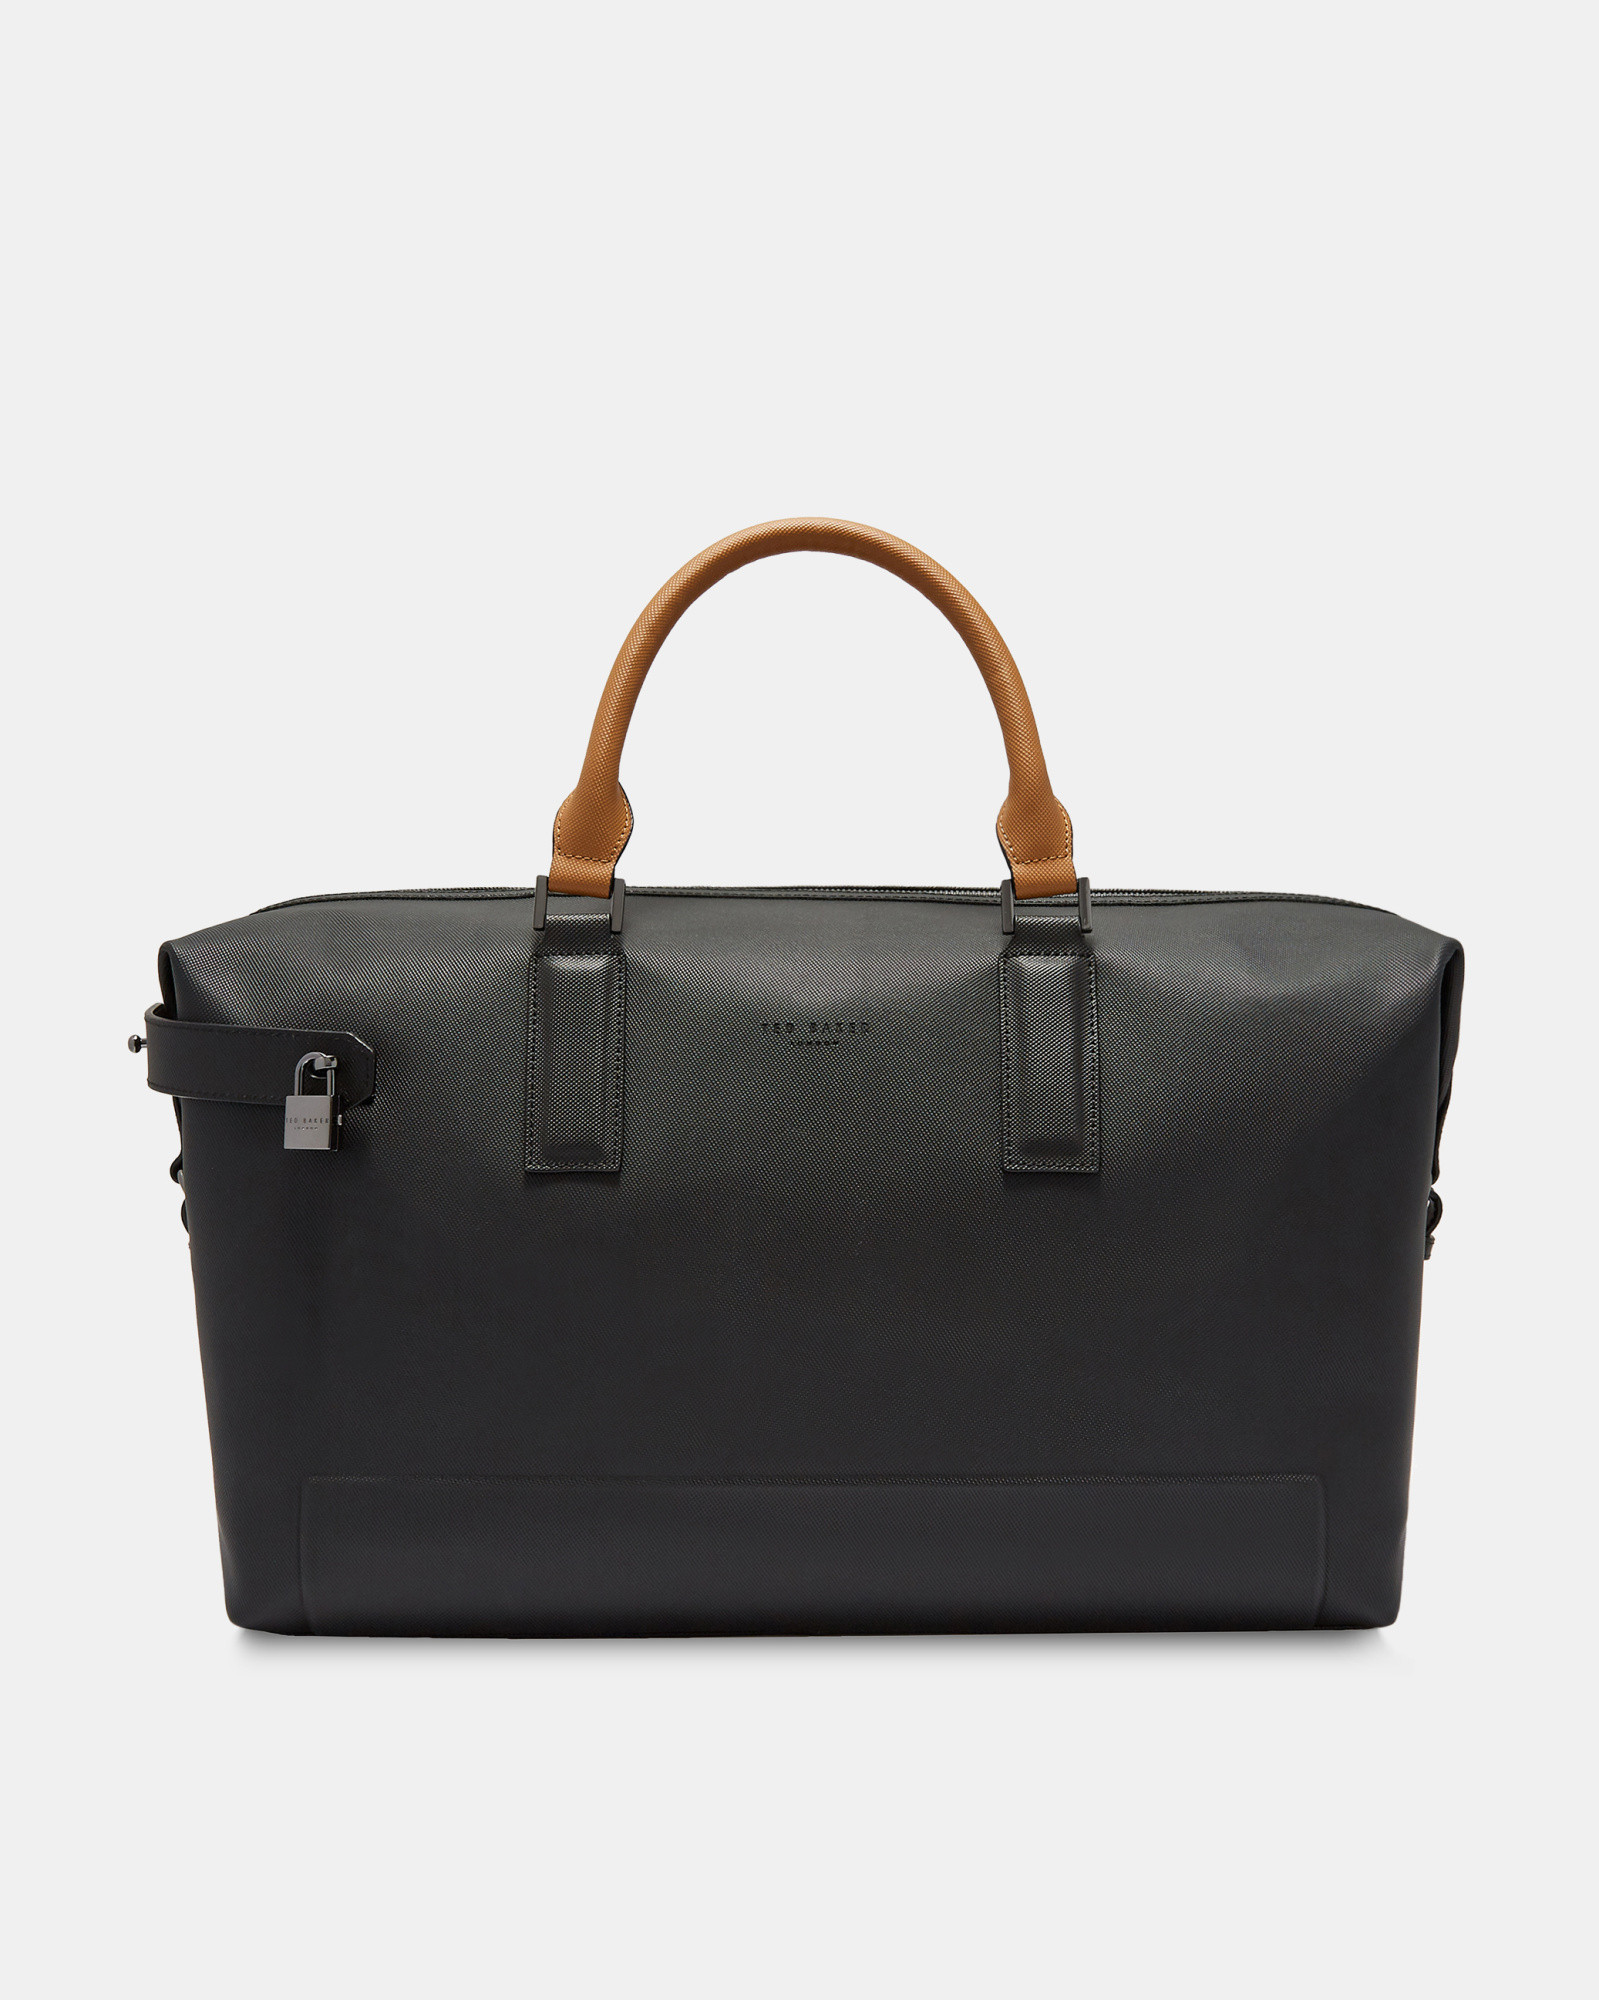 POTTS Micro perforated leather holdall